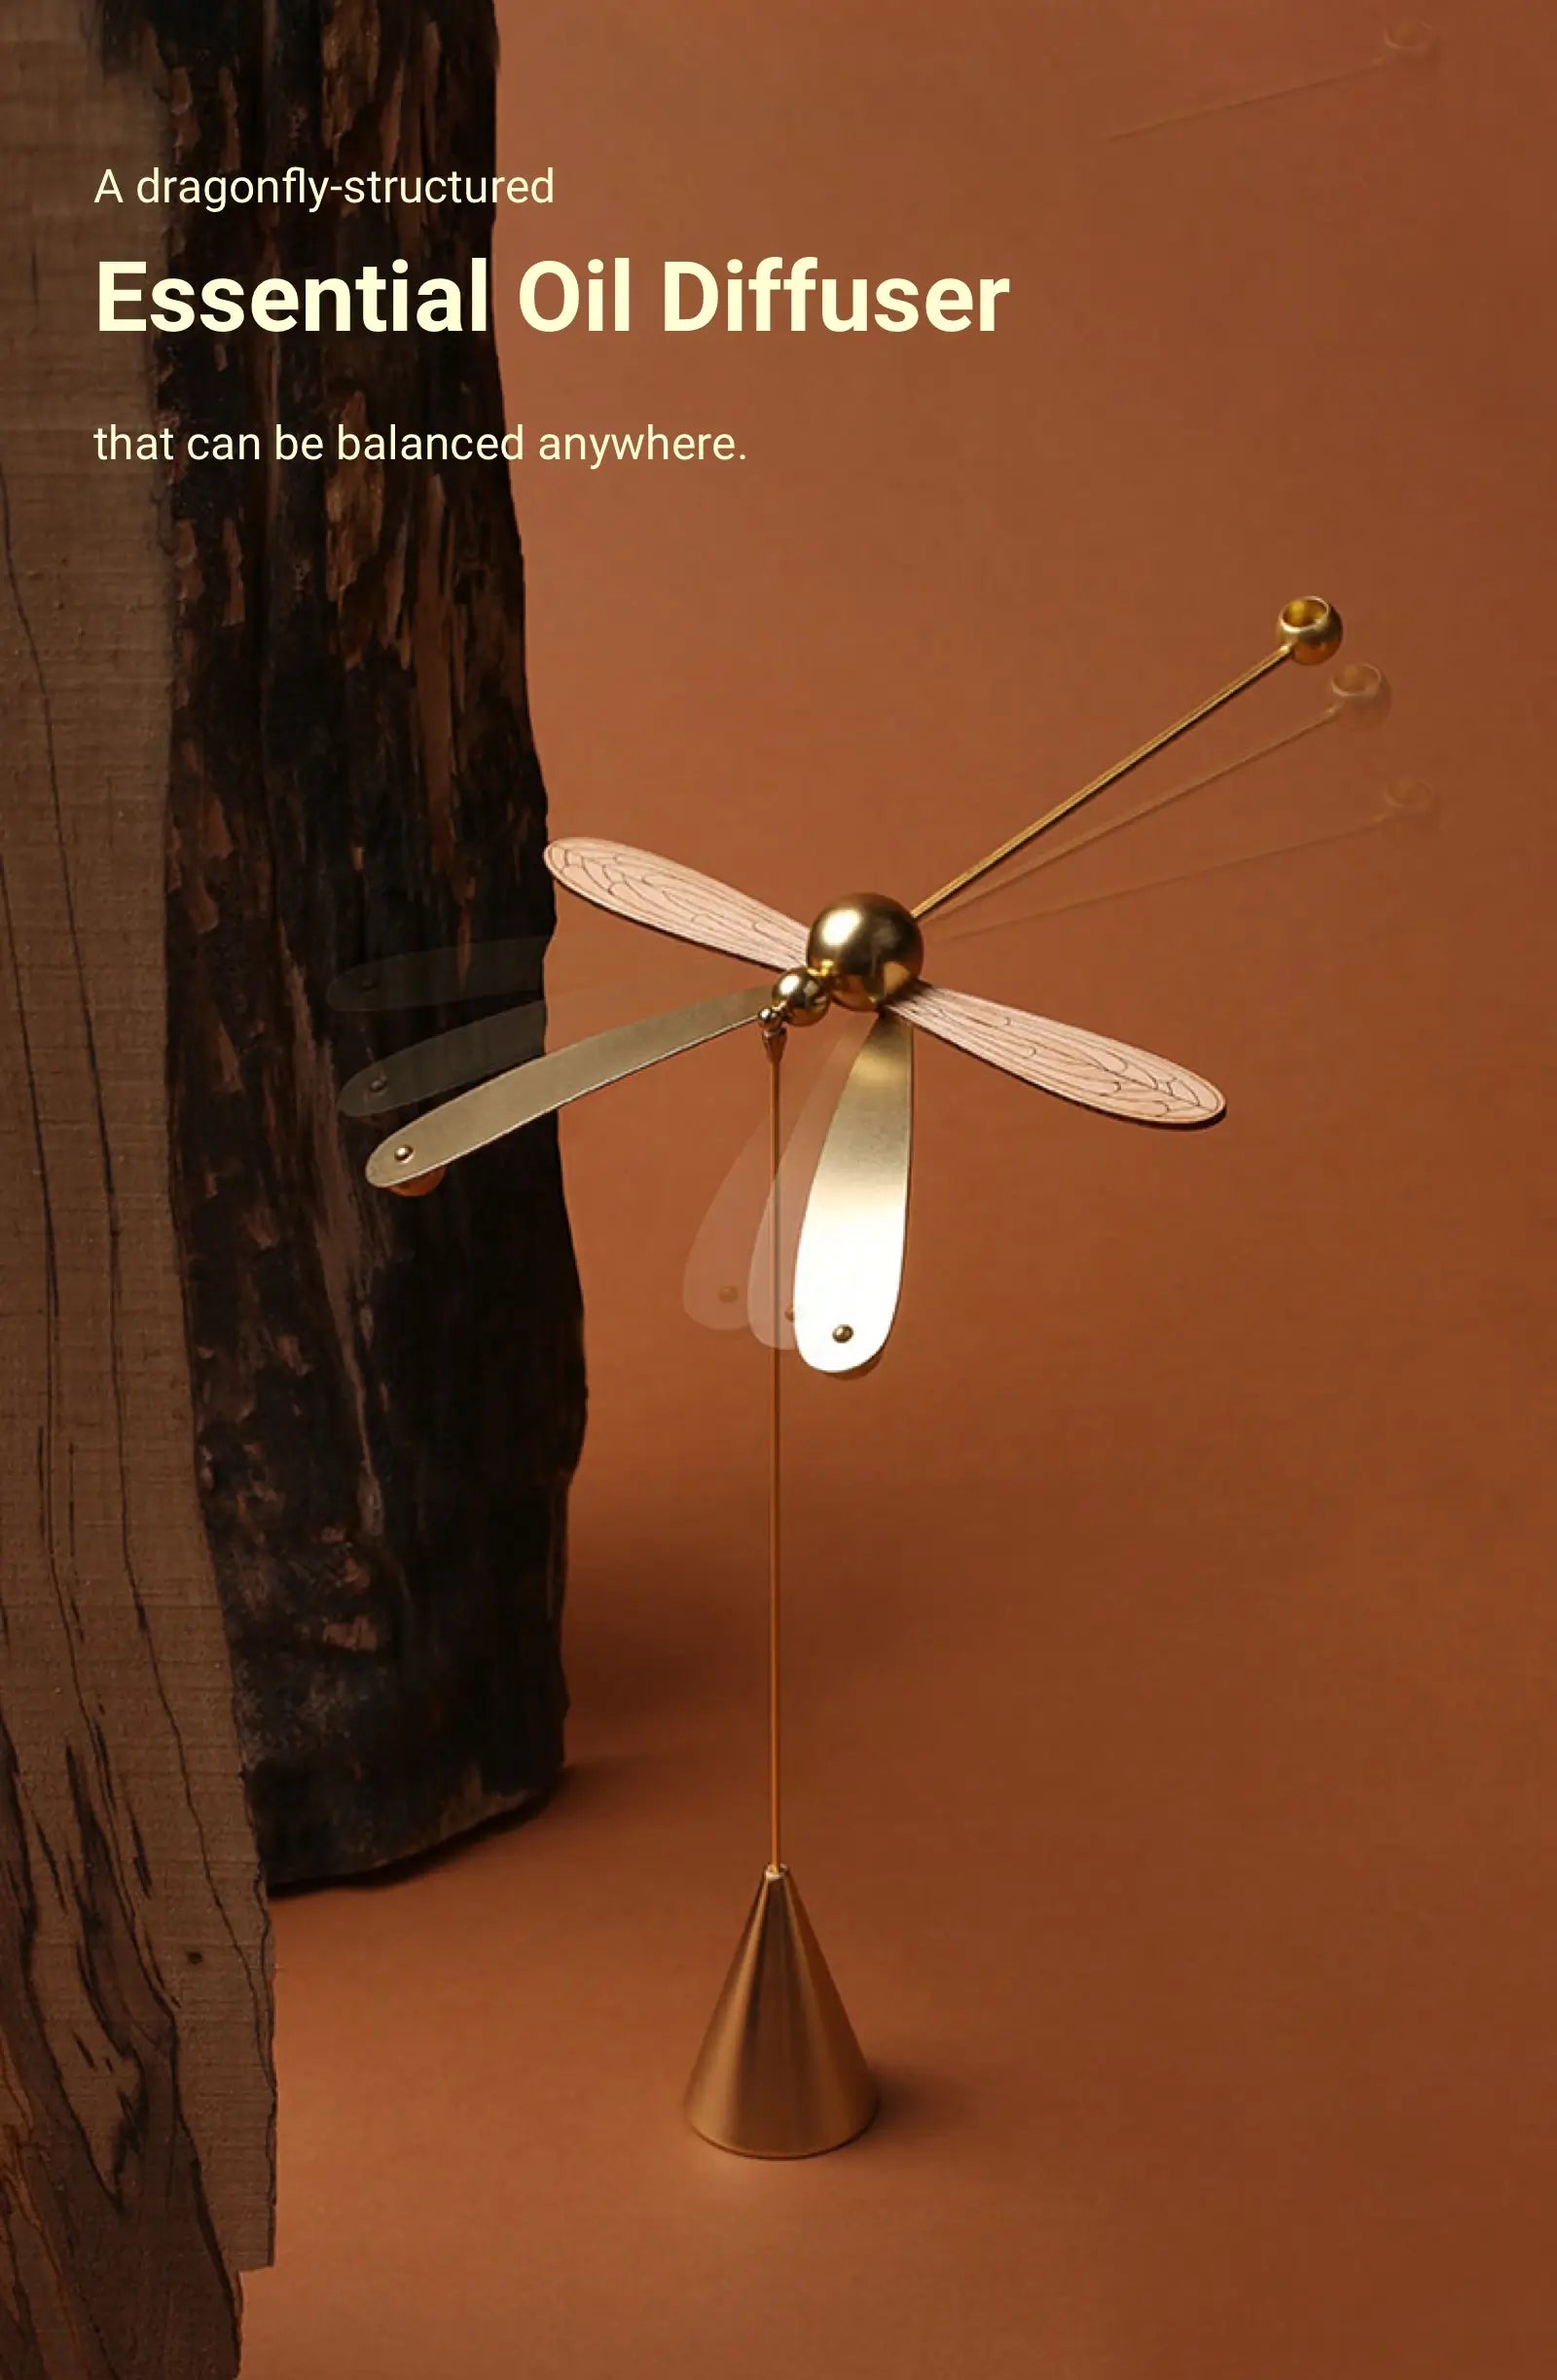 A dragonfly-structured Essential Oil Diffuser that can be balanced anywhere.